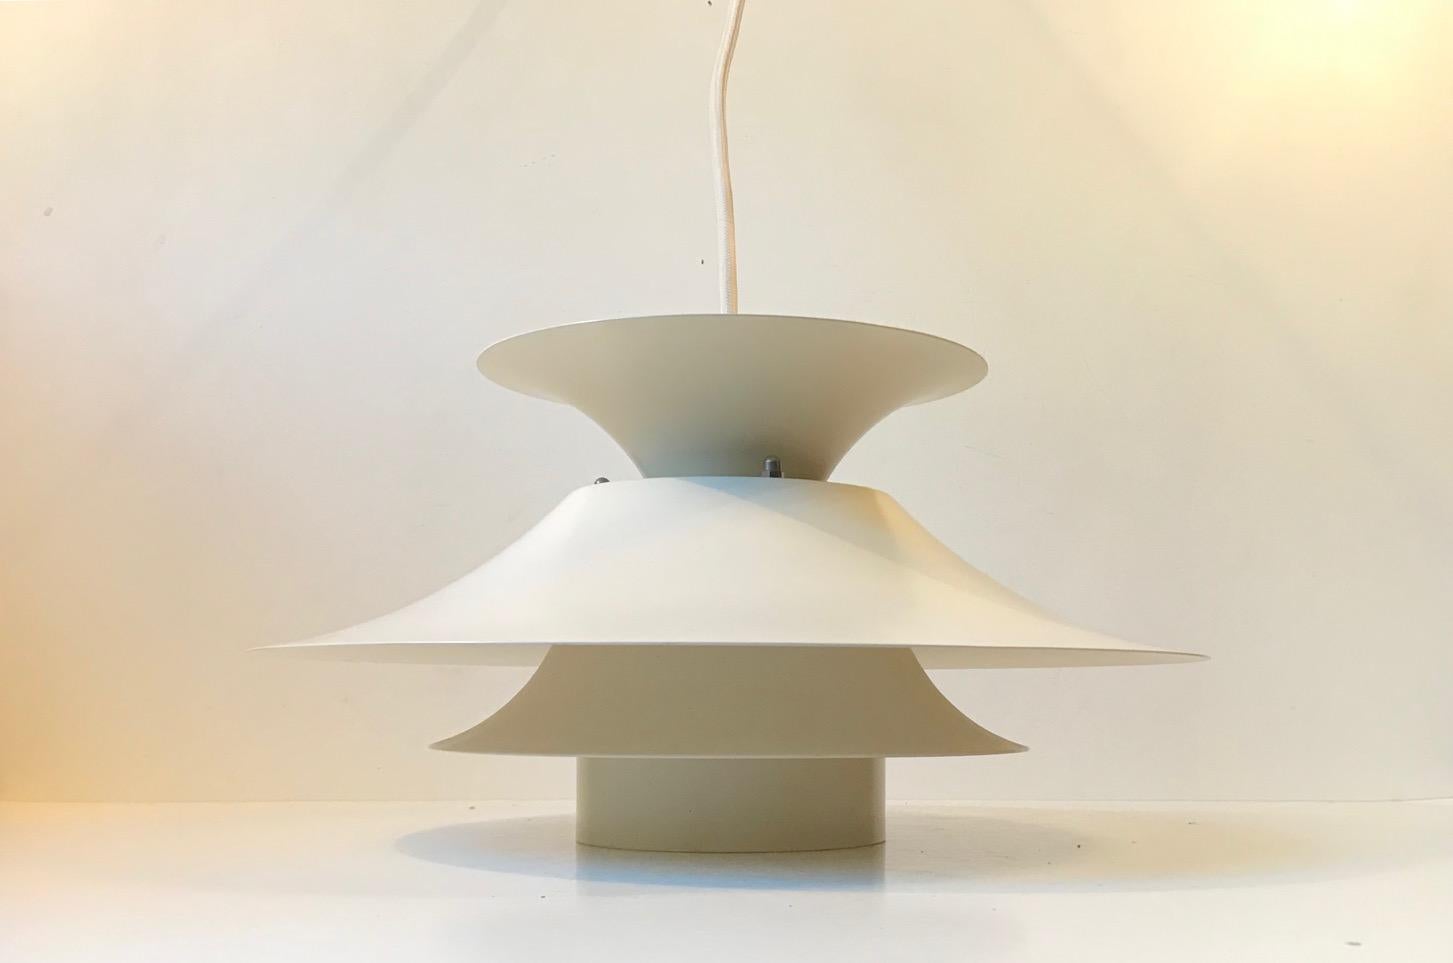 - Tiered pendant lamp
- Designed and manufactured by Jeka Belysning in Denmark during the 1970s
- Reminiscent of the PH4 and PH5 lamps by Poul Henningsen
- It is constructed of white powder coated metal
- Reflective white inner shades
- It is